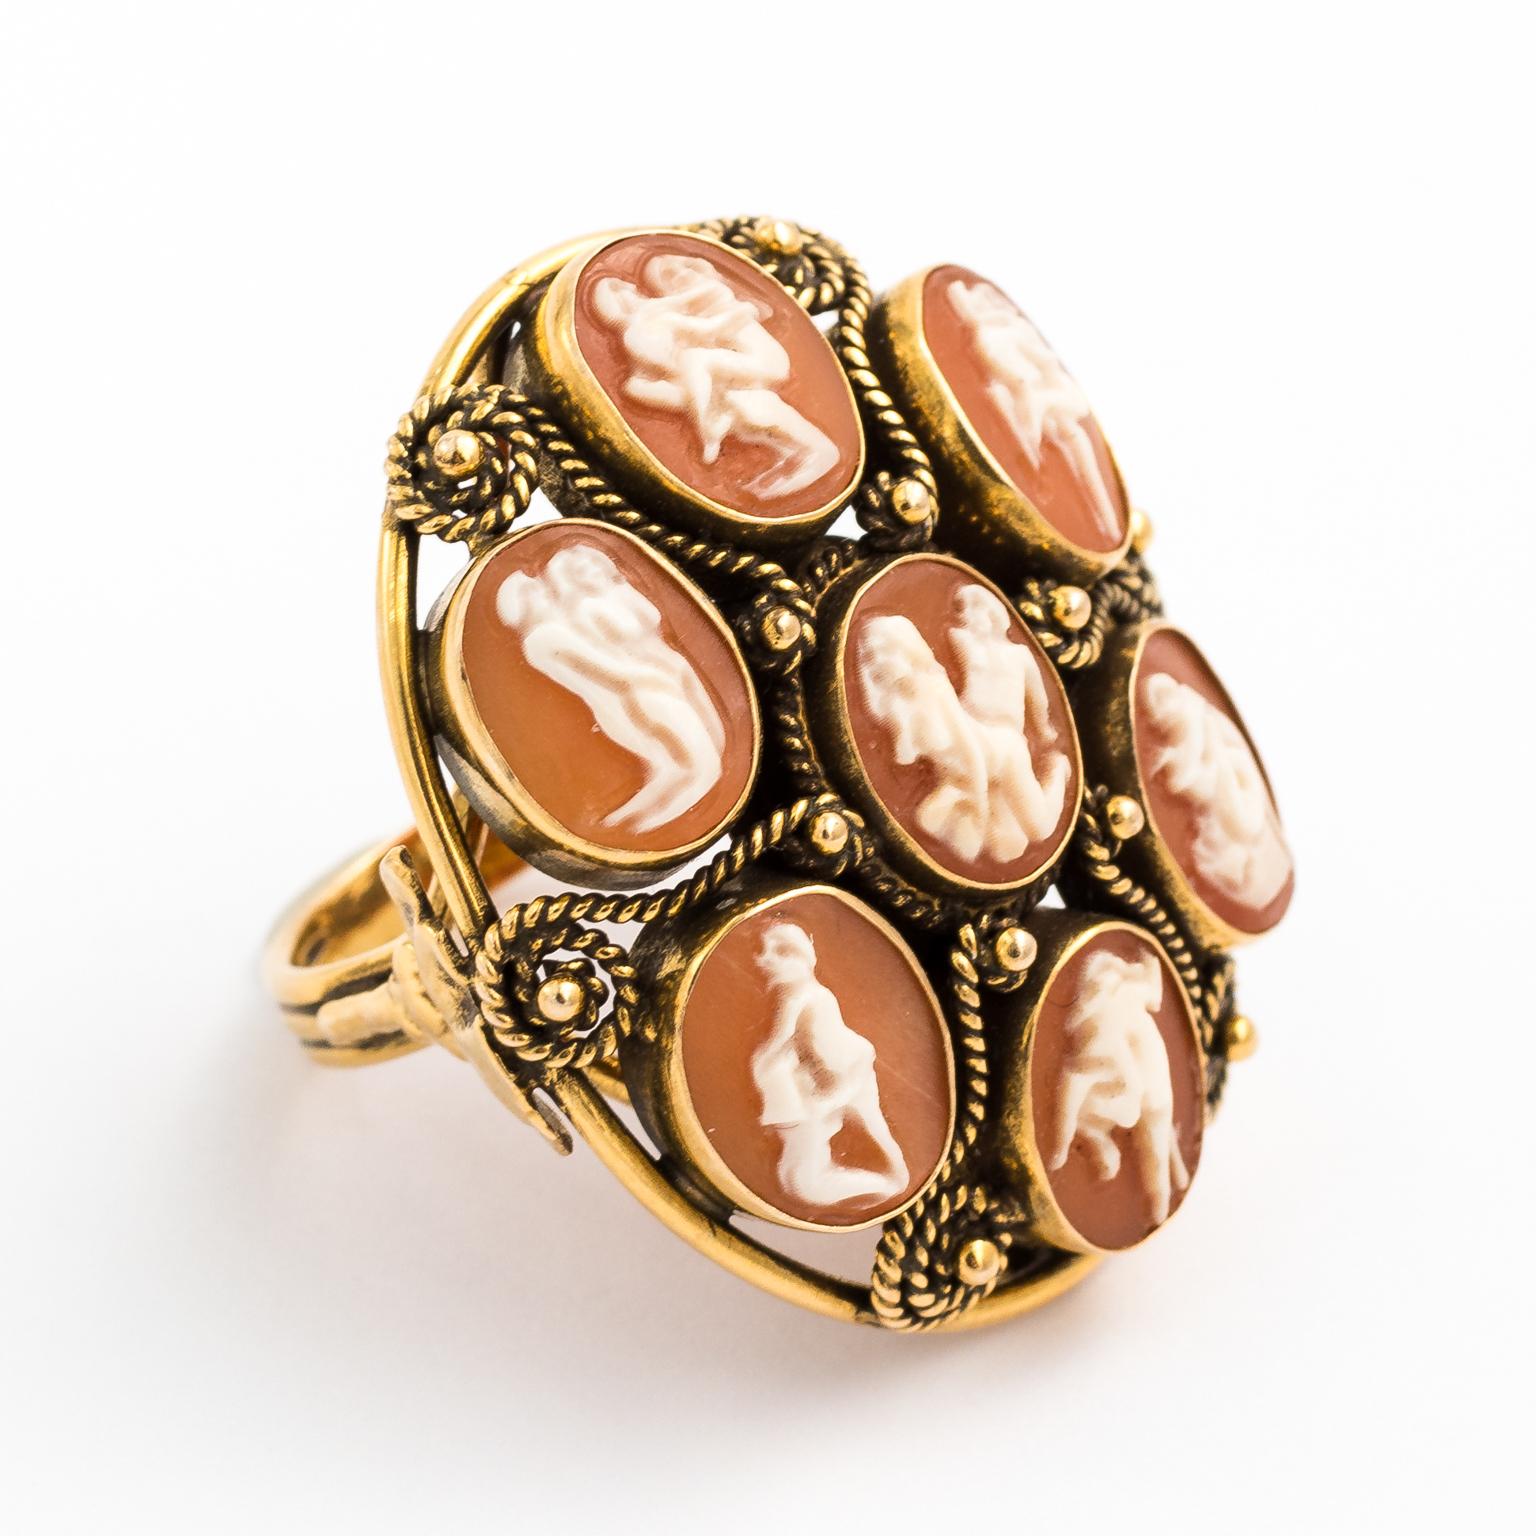 Karma Sutra Cameo Ring In Good Condition For Sale In St.amford, CT